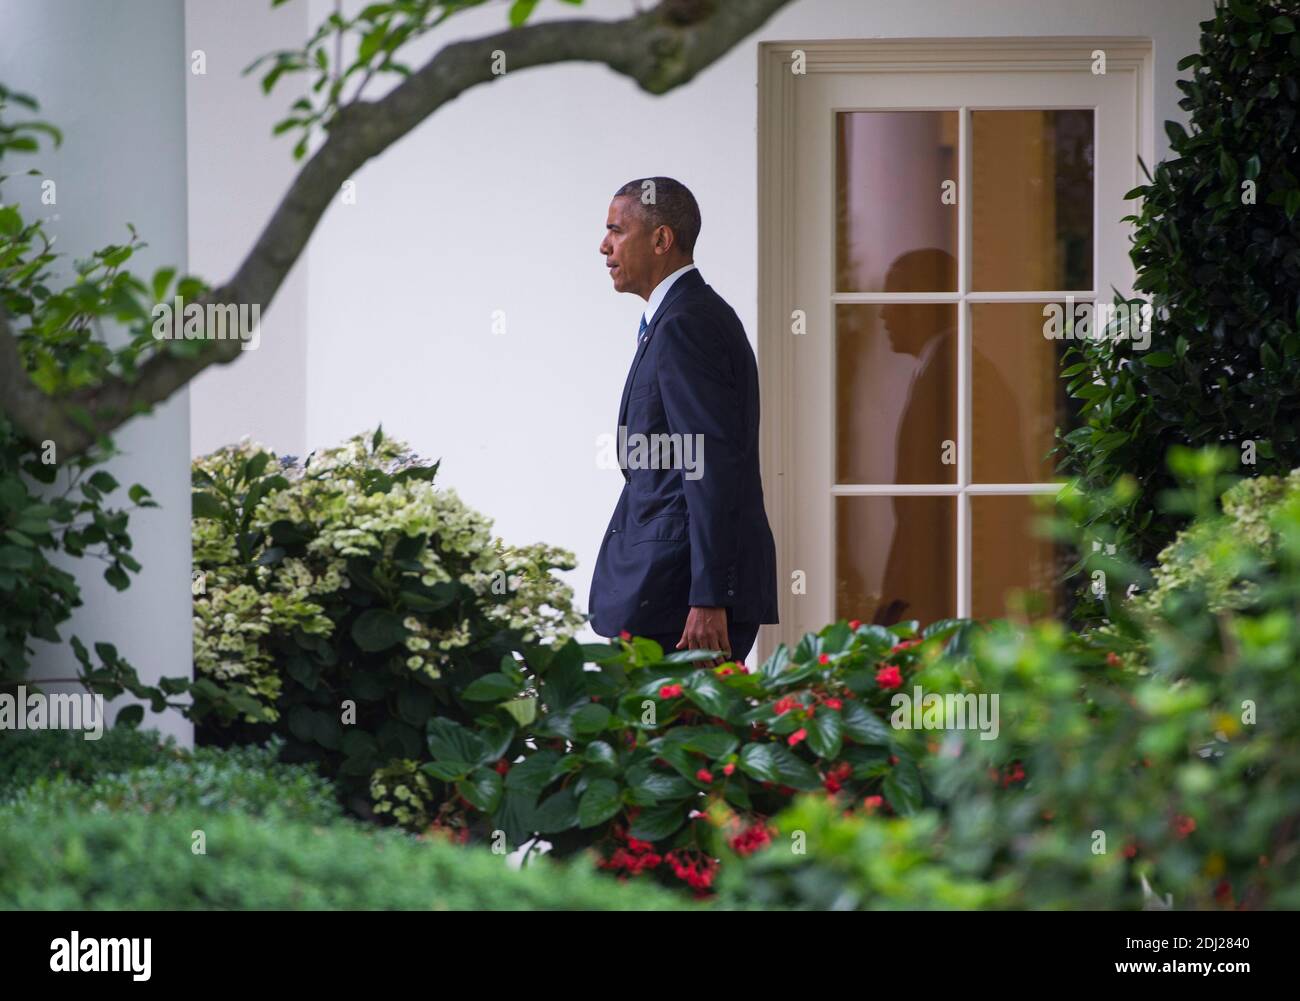 U.S. President Barack Obama walks out of the Oval Office as he departs the White House for San Jose, California in Washington, DC, USA, 23 June 2016. While in San Jose, Obama will attend the Global Entrepreneurship Summit with Facebook co-founder and CEO Mark Zuckerberg. Photo by Molly Ryley/Pool/ABACAPRESS.COM Stock Photo